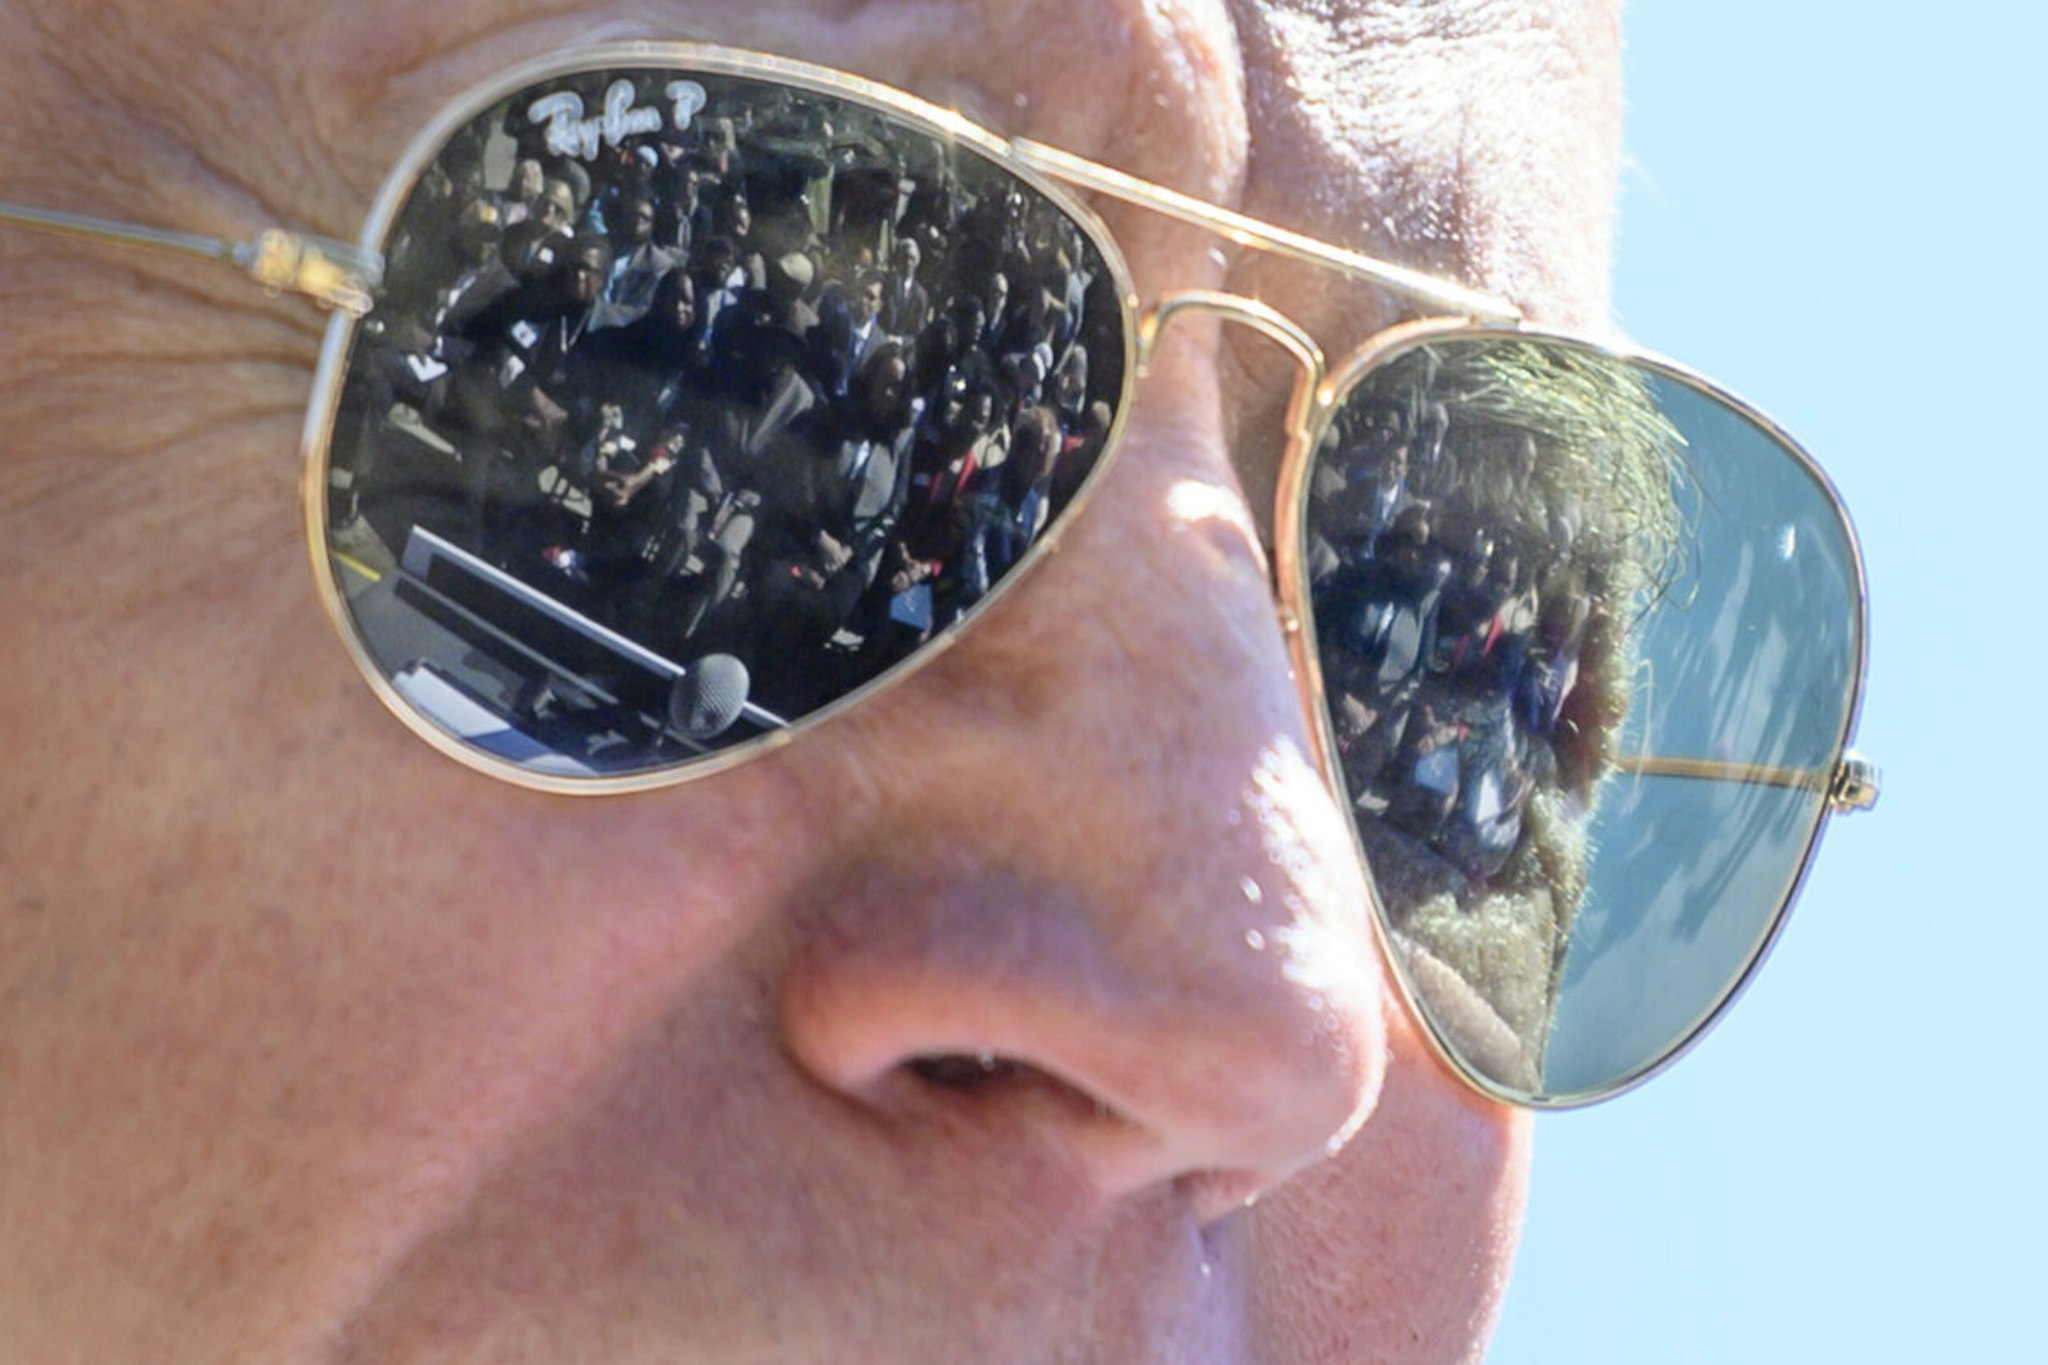 Supporters are reflected in the Ray Ban sunglasses of Democratic presidential candidate Joe Biden as he speaks at St. James Santee Family Health Center during a town hall meeting in McClellanville, SC, on February 27, 2020.